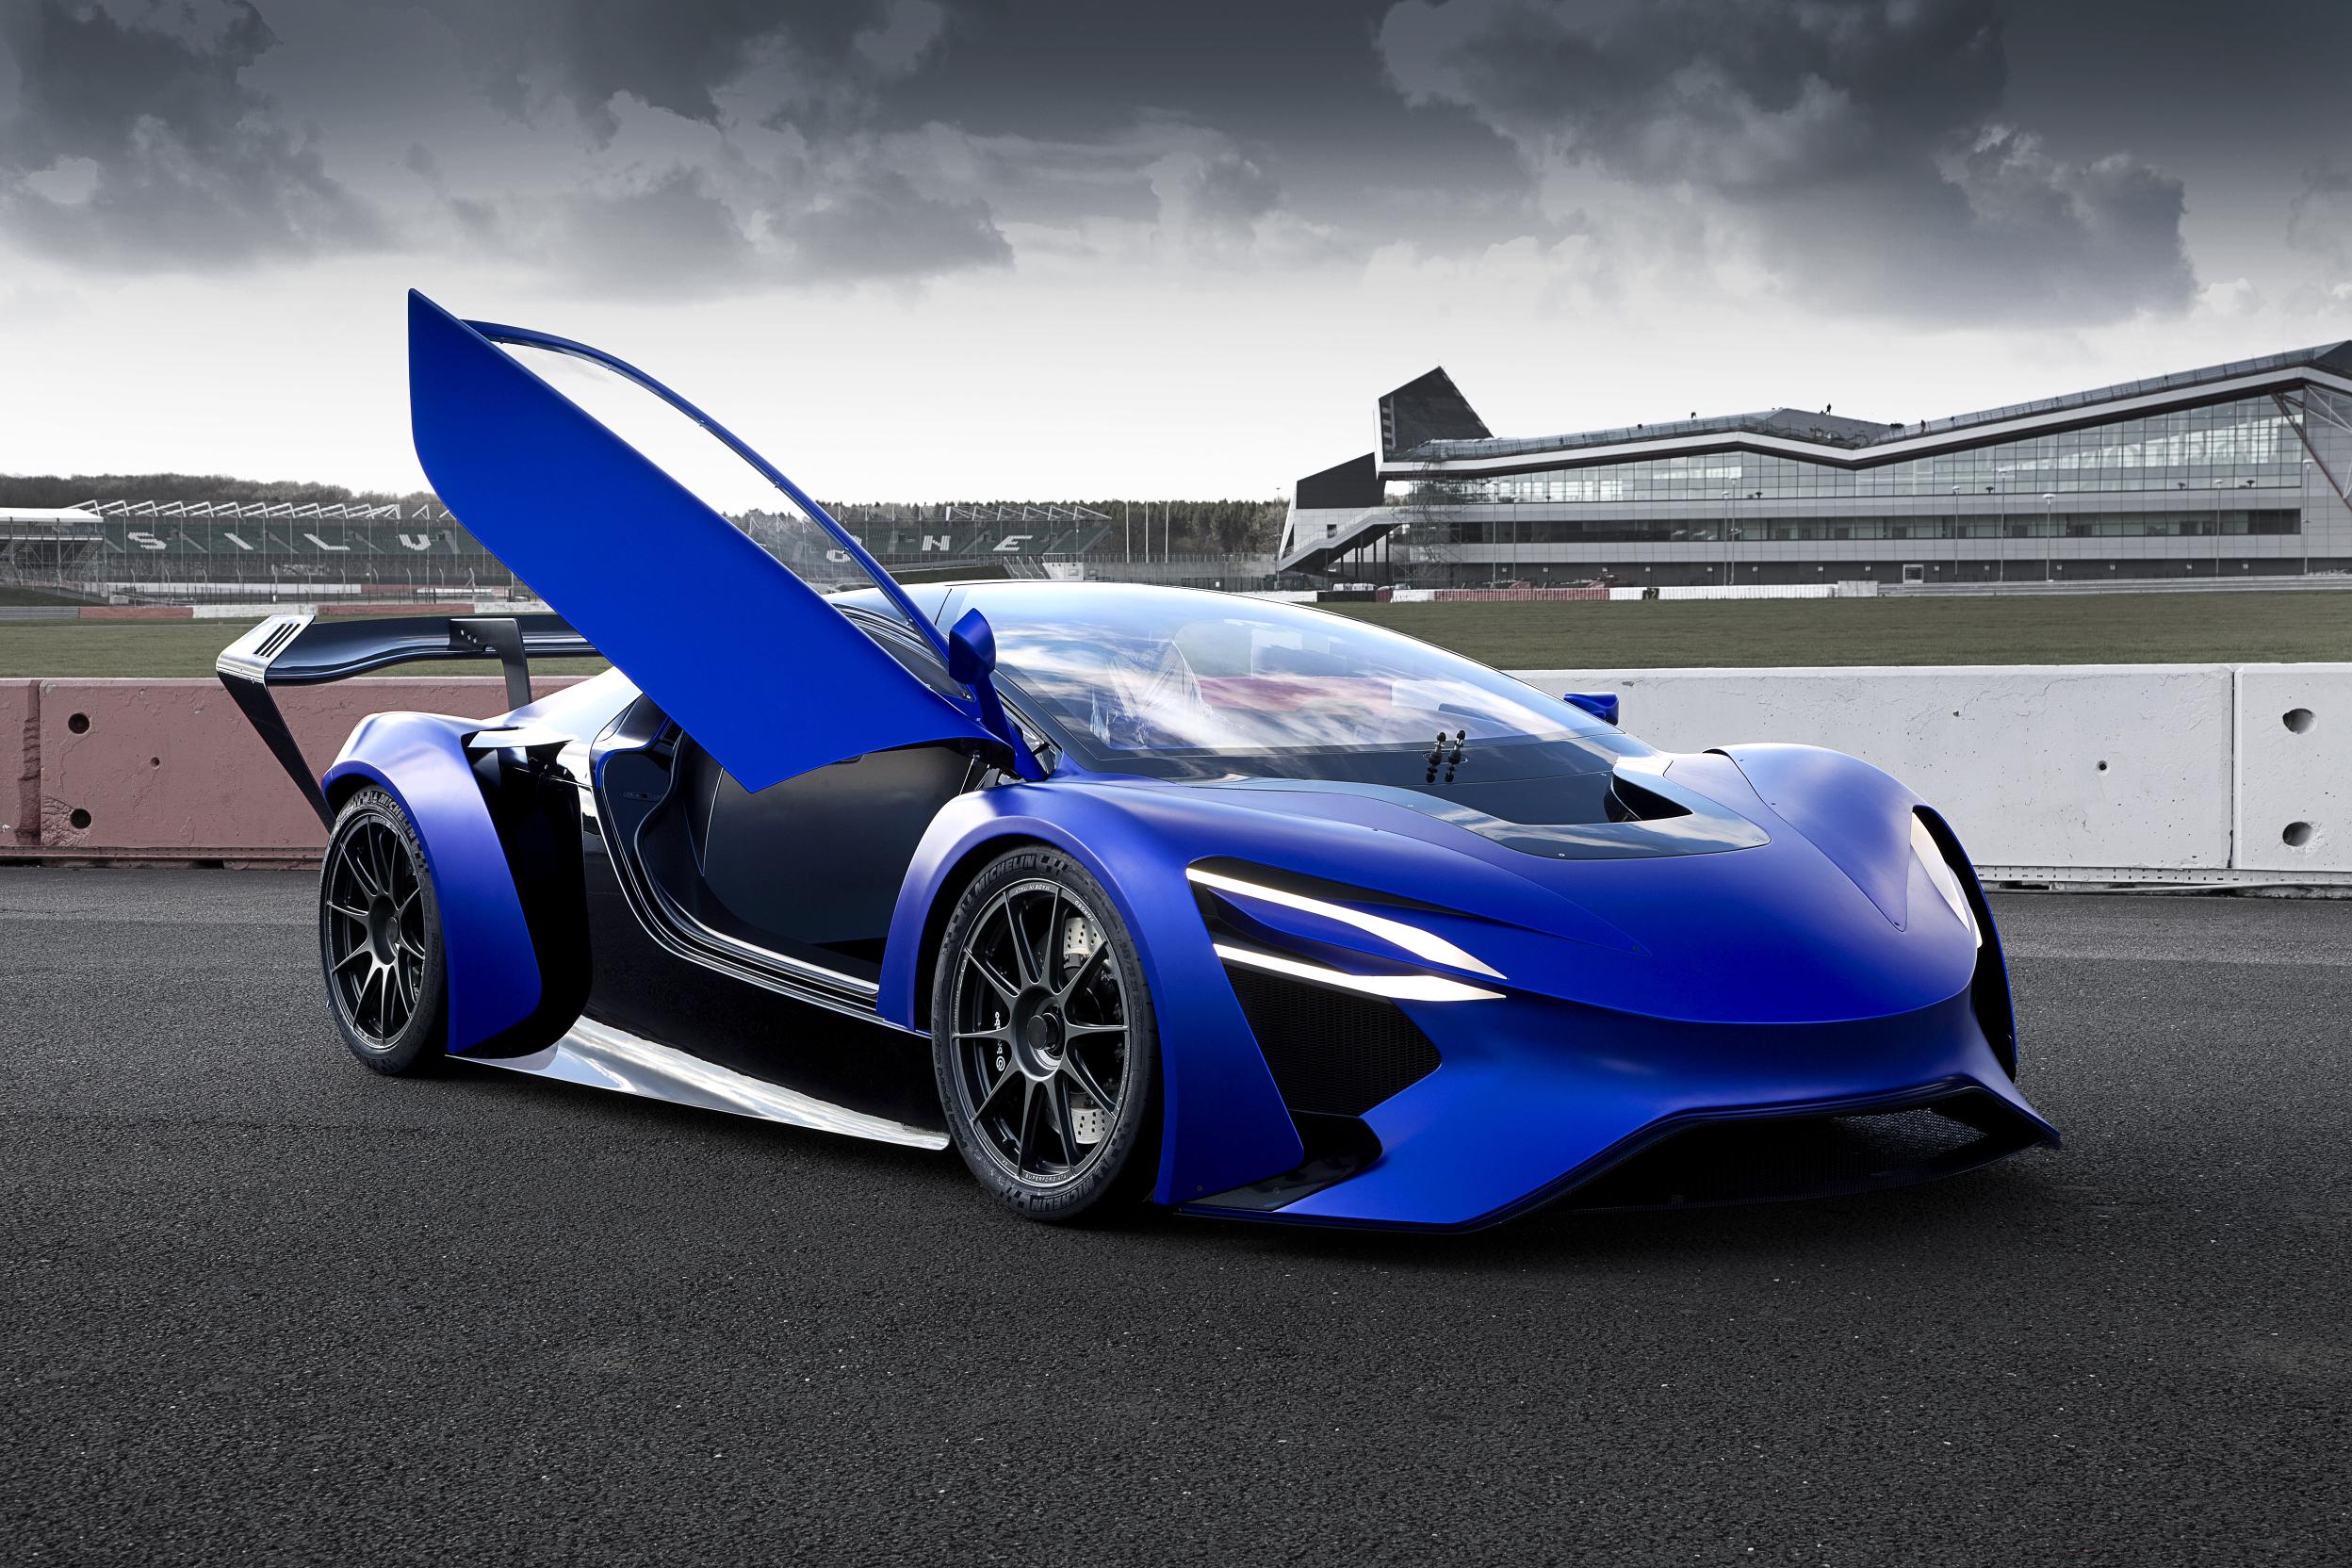 Techrules AT96 TREV supercar concept  - on track 3